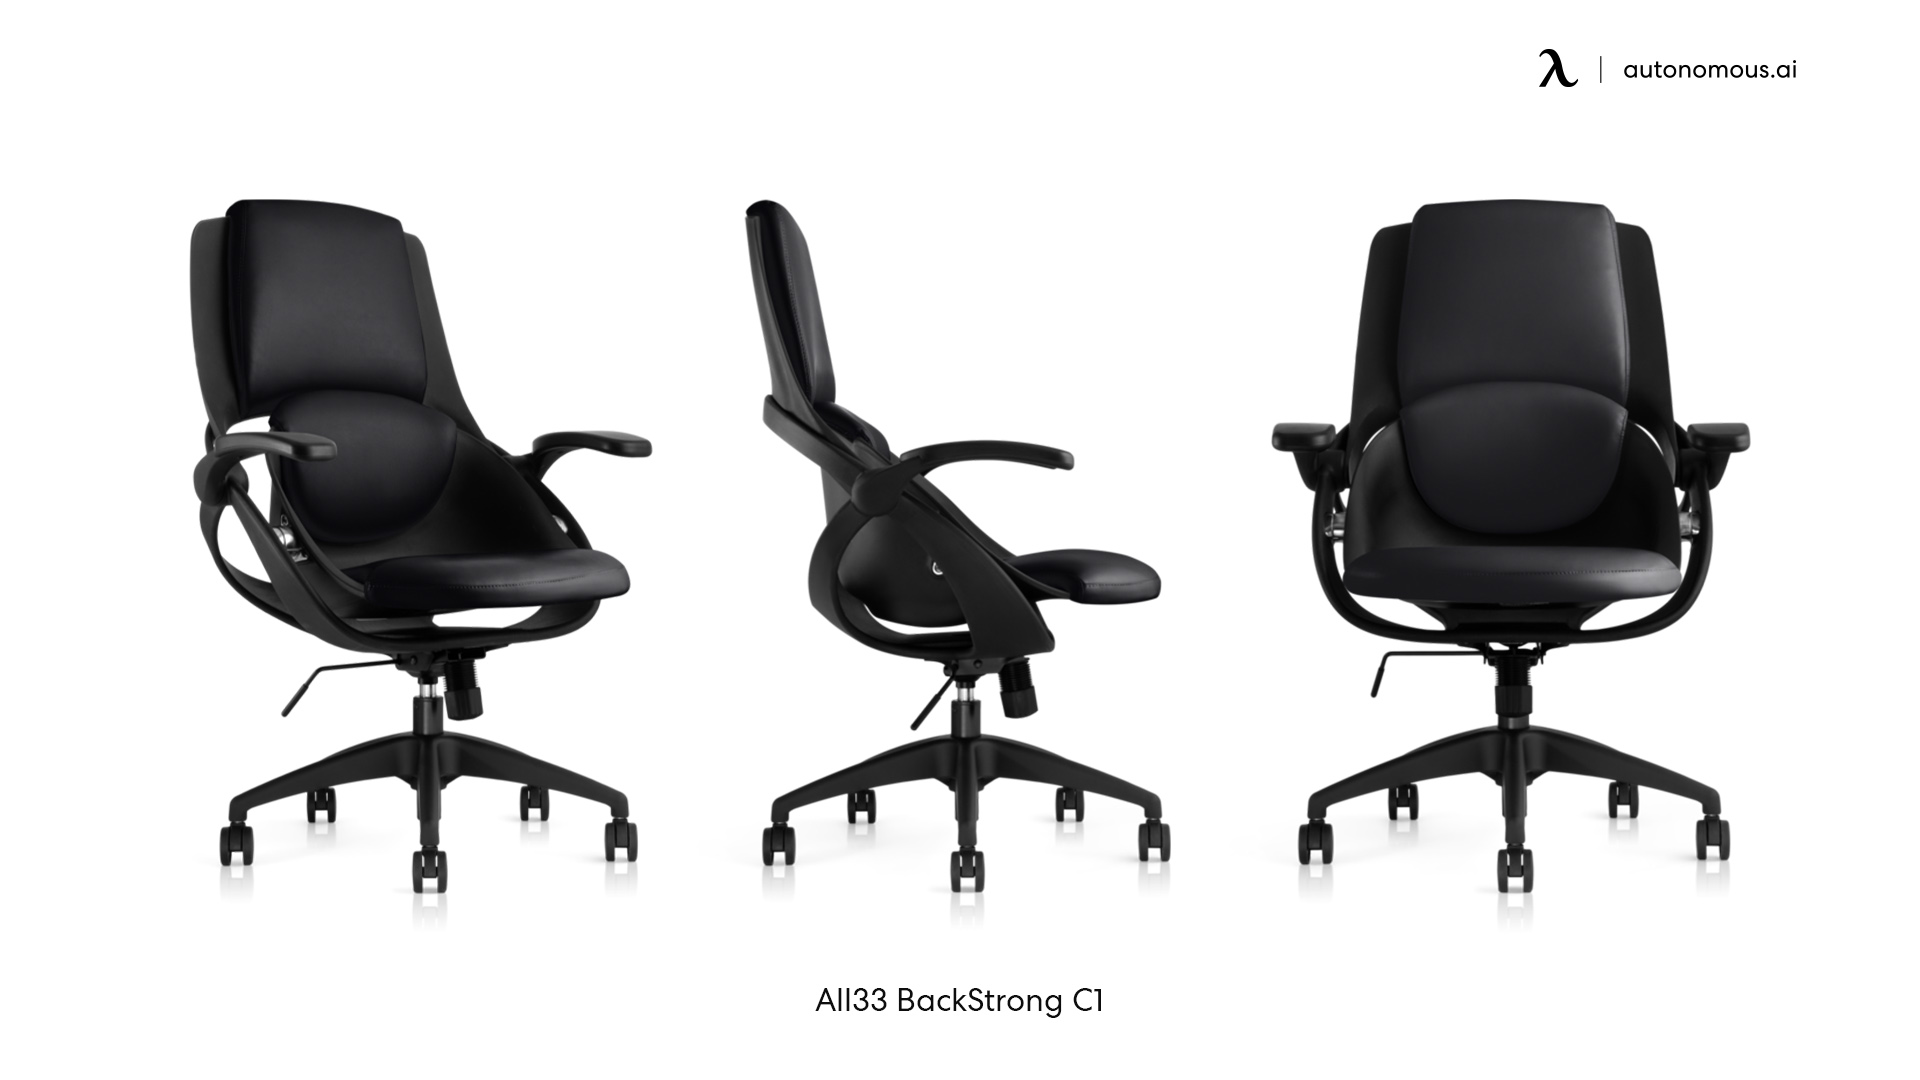 All33 BackStrong C1 tall office chair